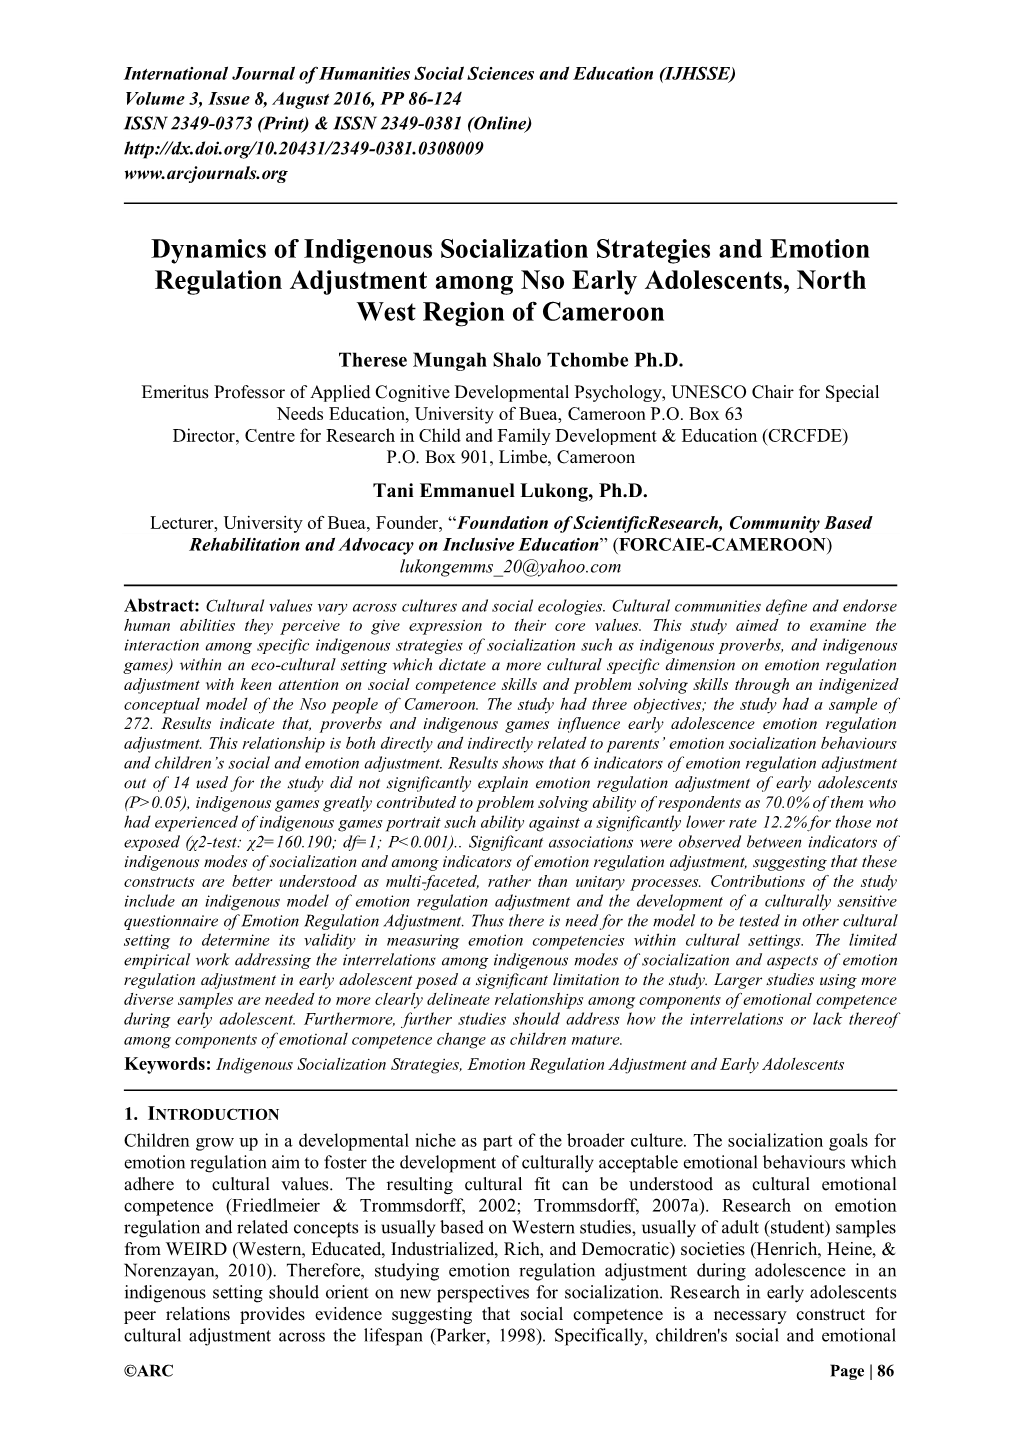 Dynamics of Indigenous Socialization Strategies and Emotion Regulation Adjustment Among Nso Early Adolescents, North West Region of Cameroon